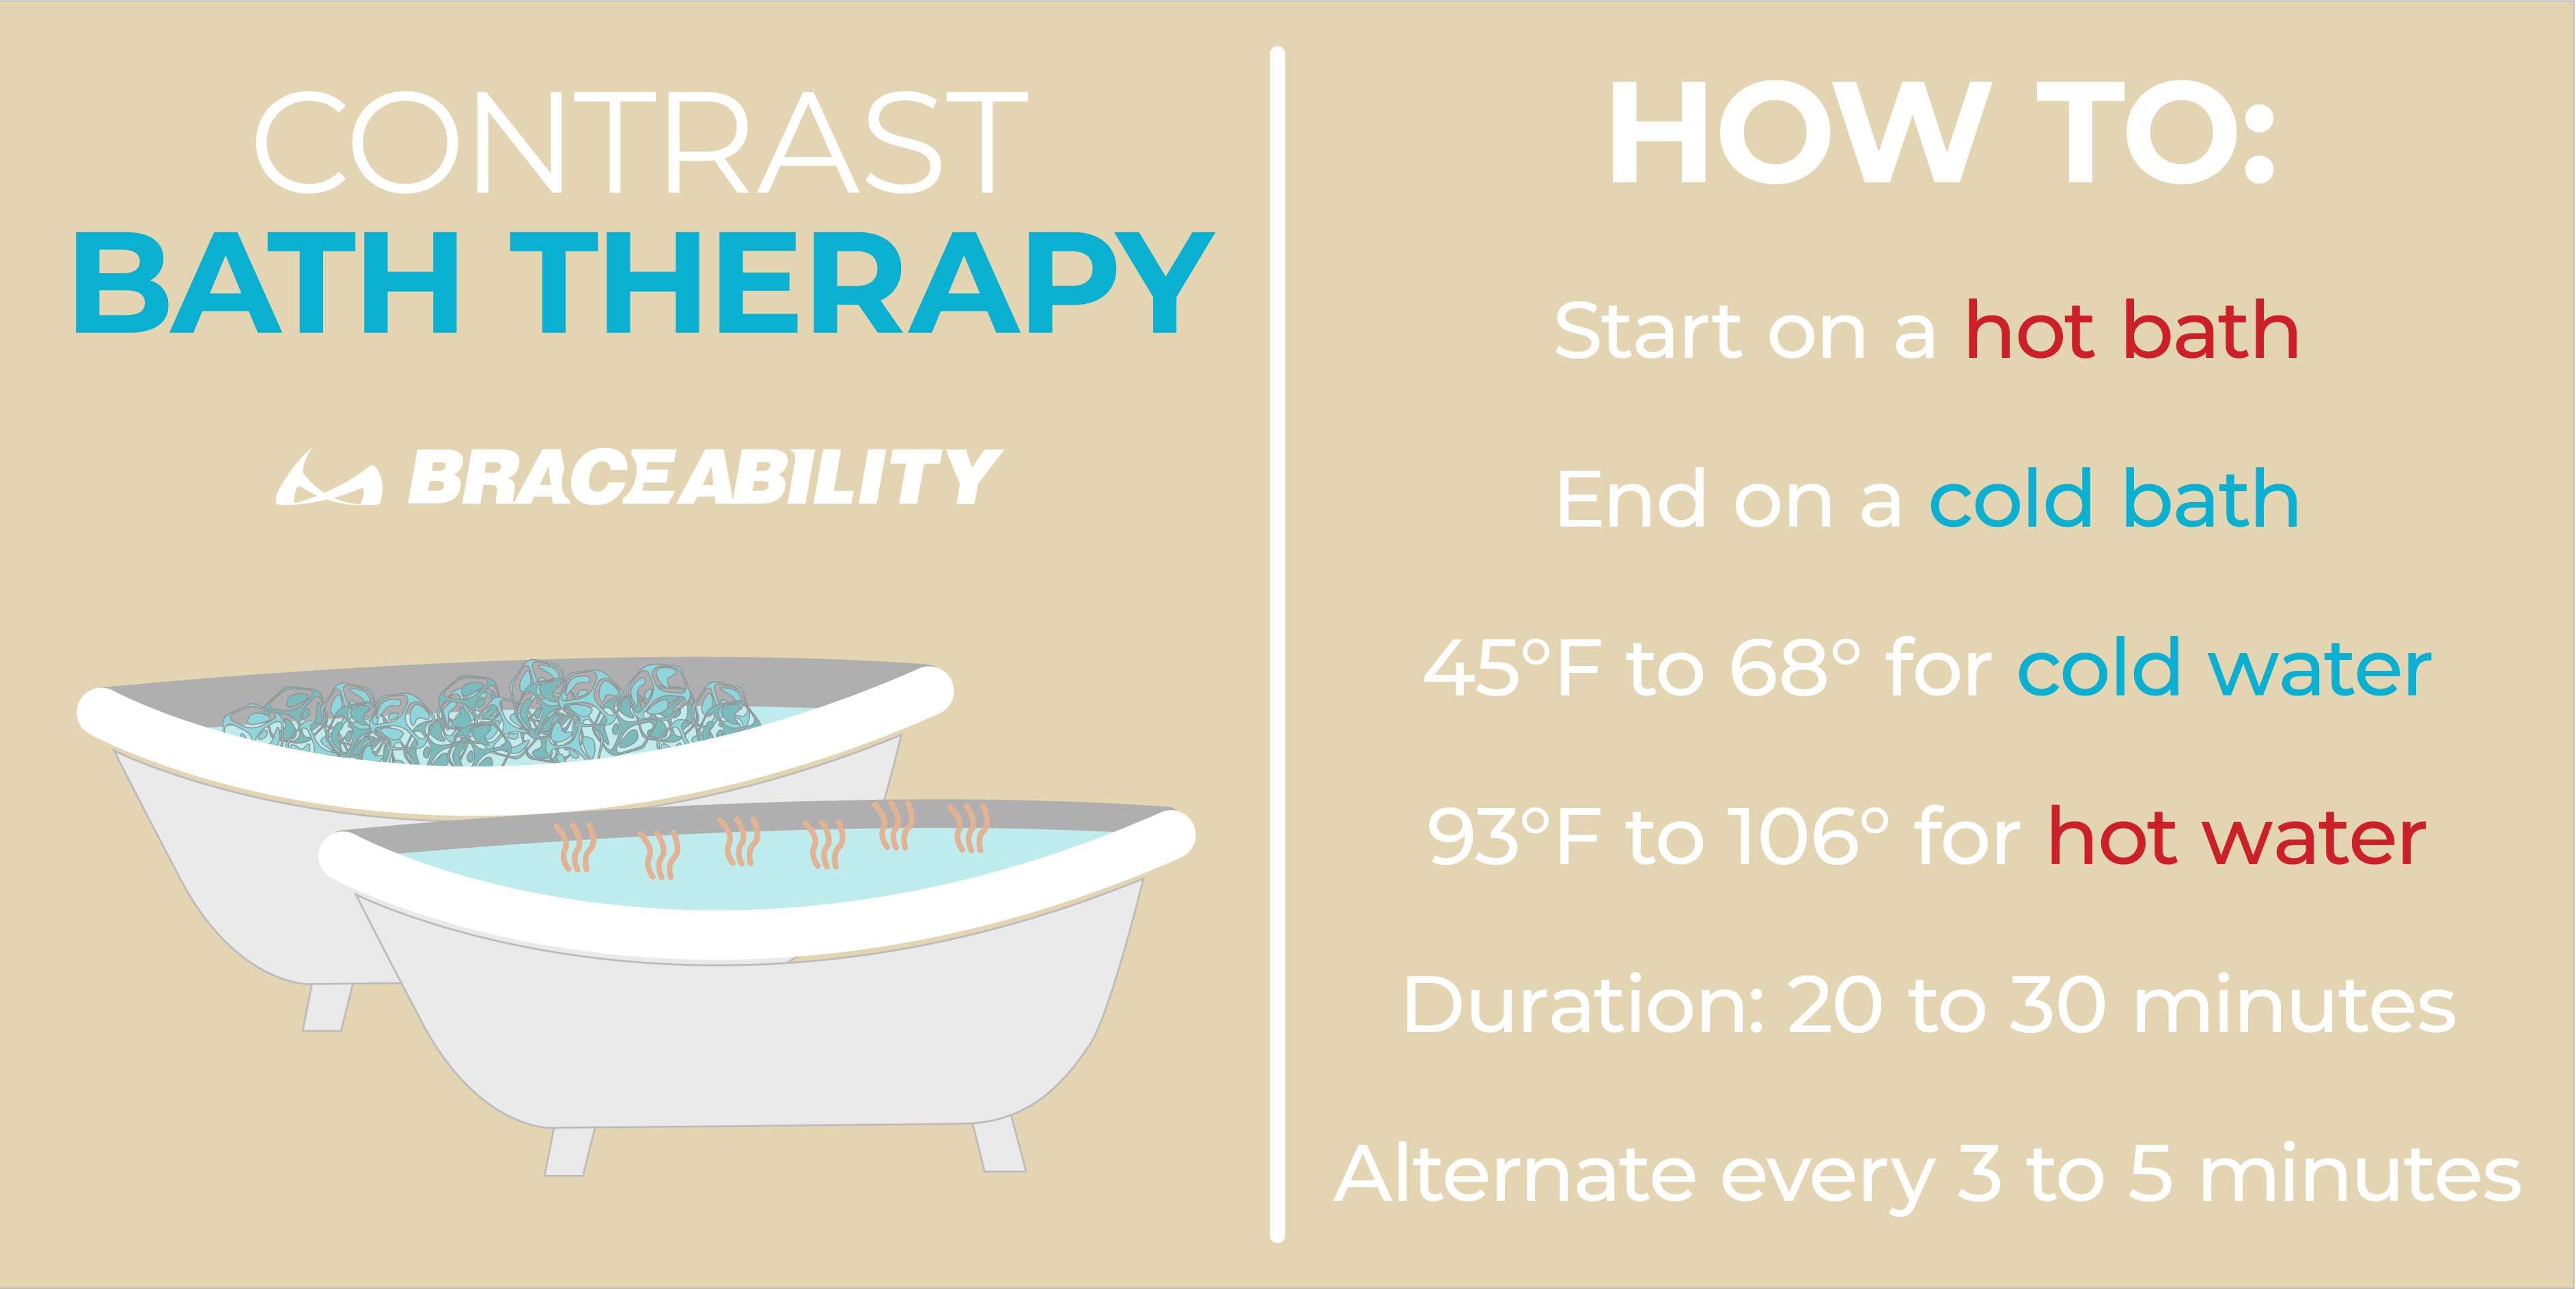 infographic on how to do contrast bath therapy for muscle rehab